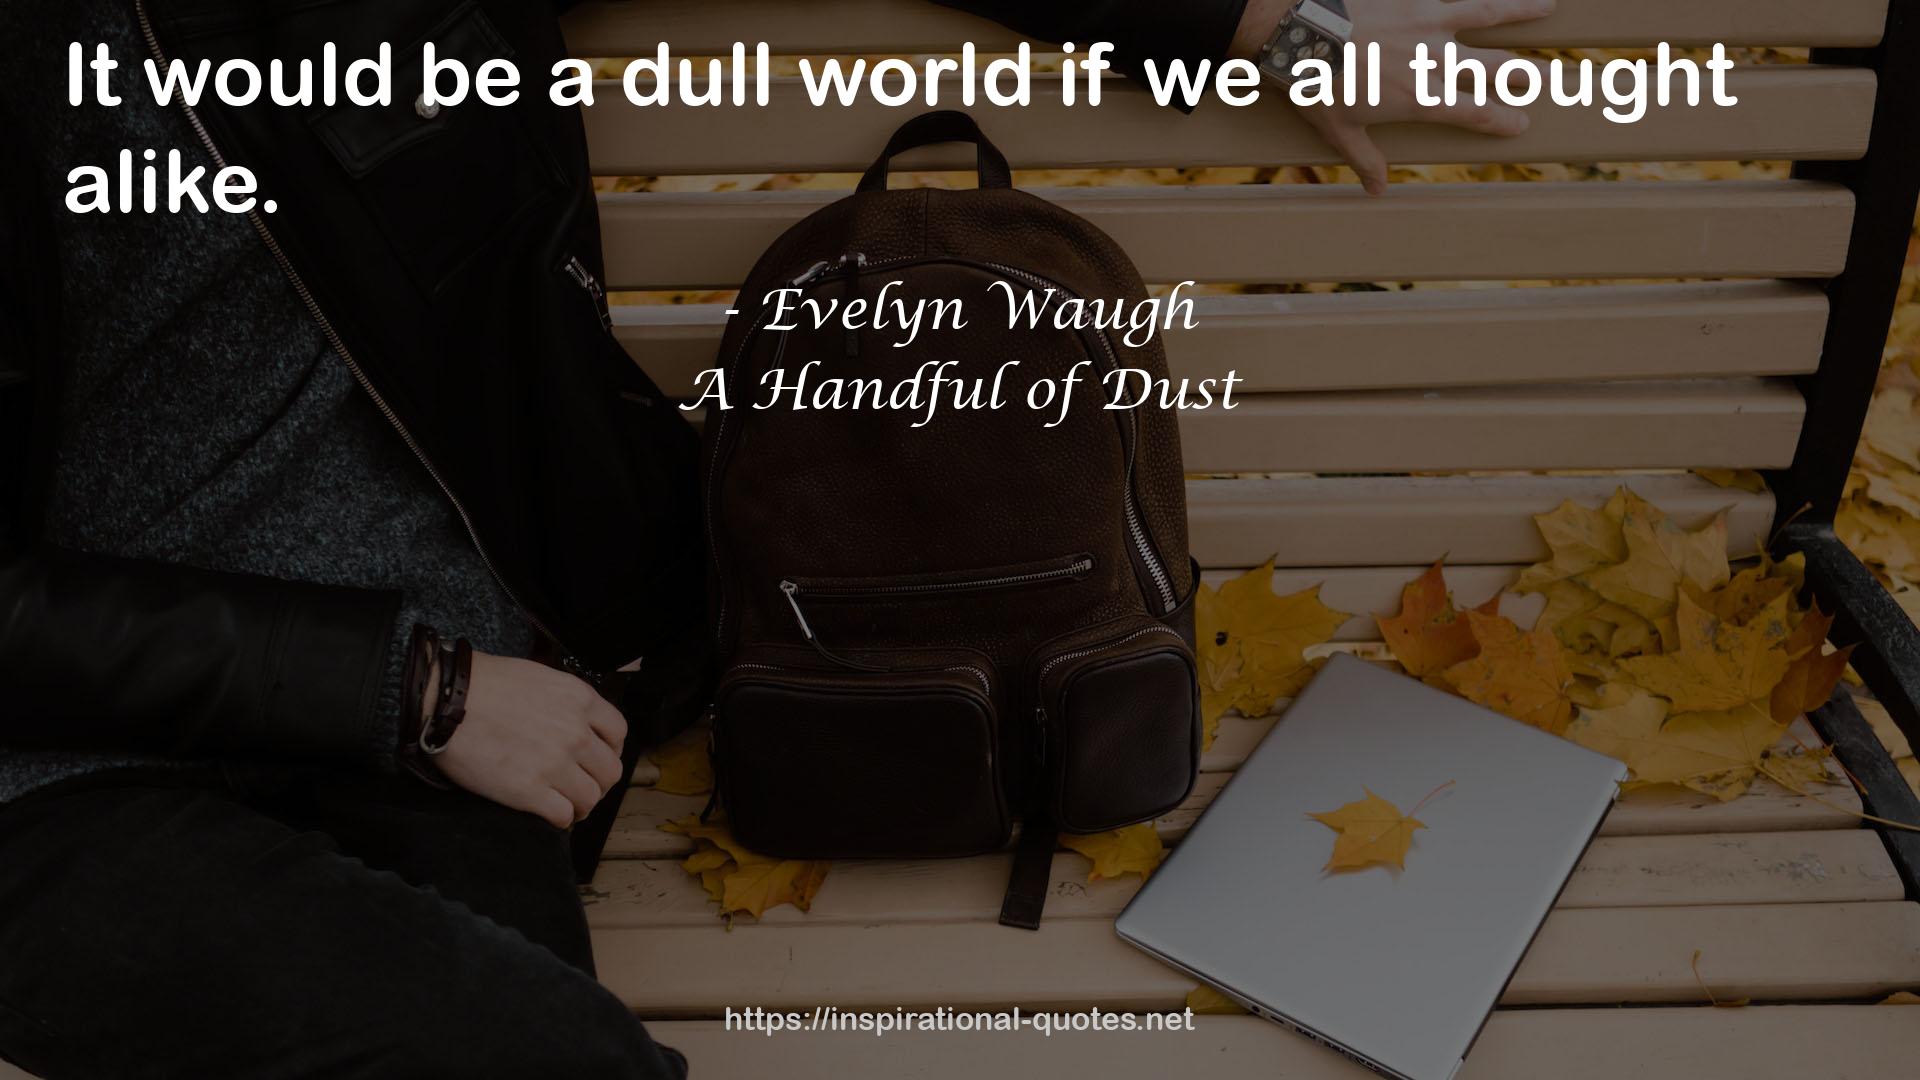 Evelyn Waugh QUOTES